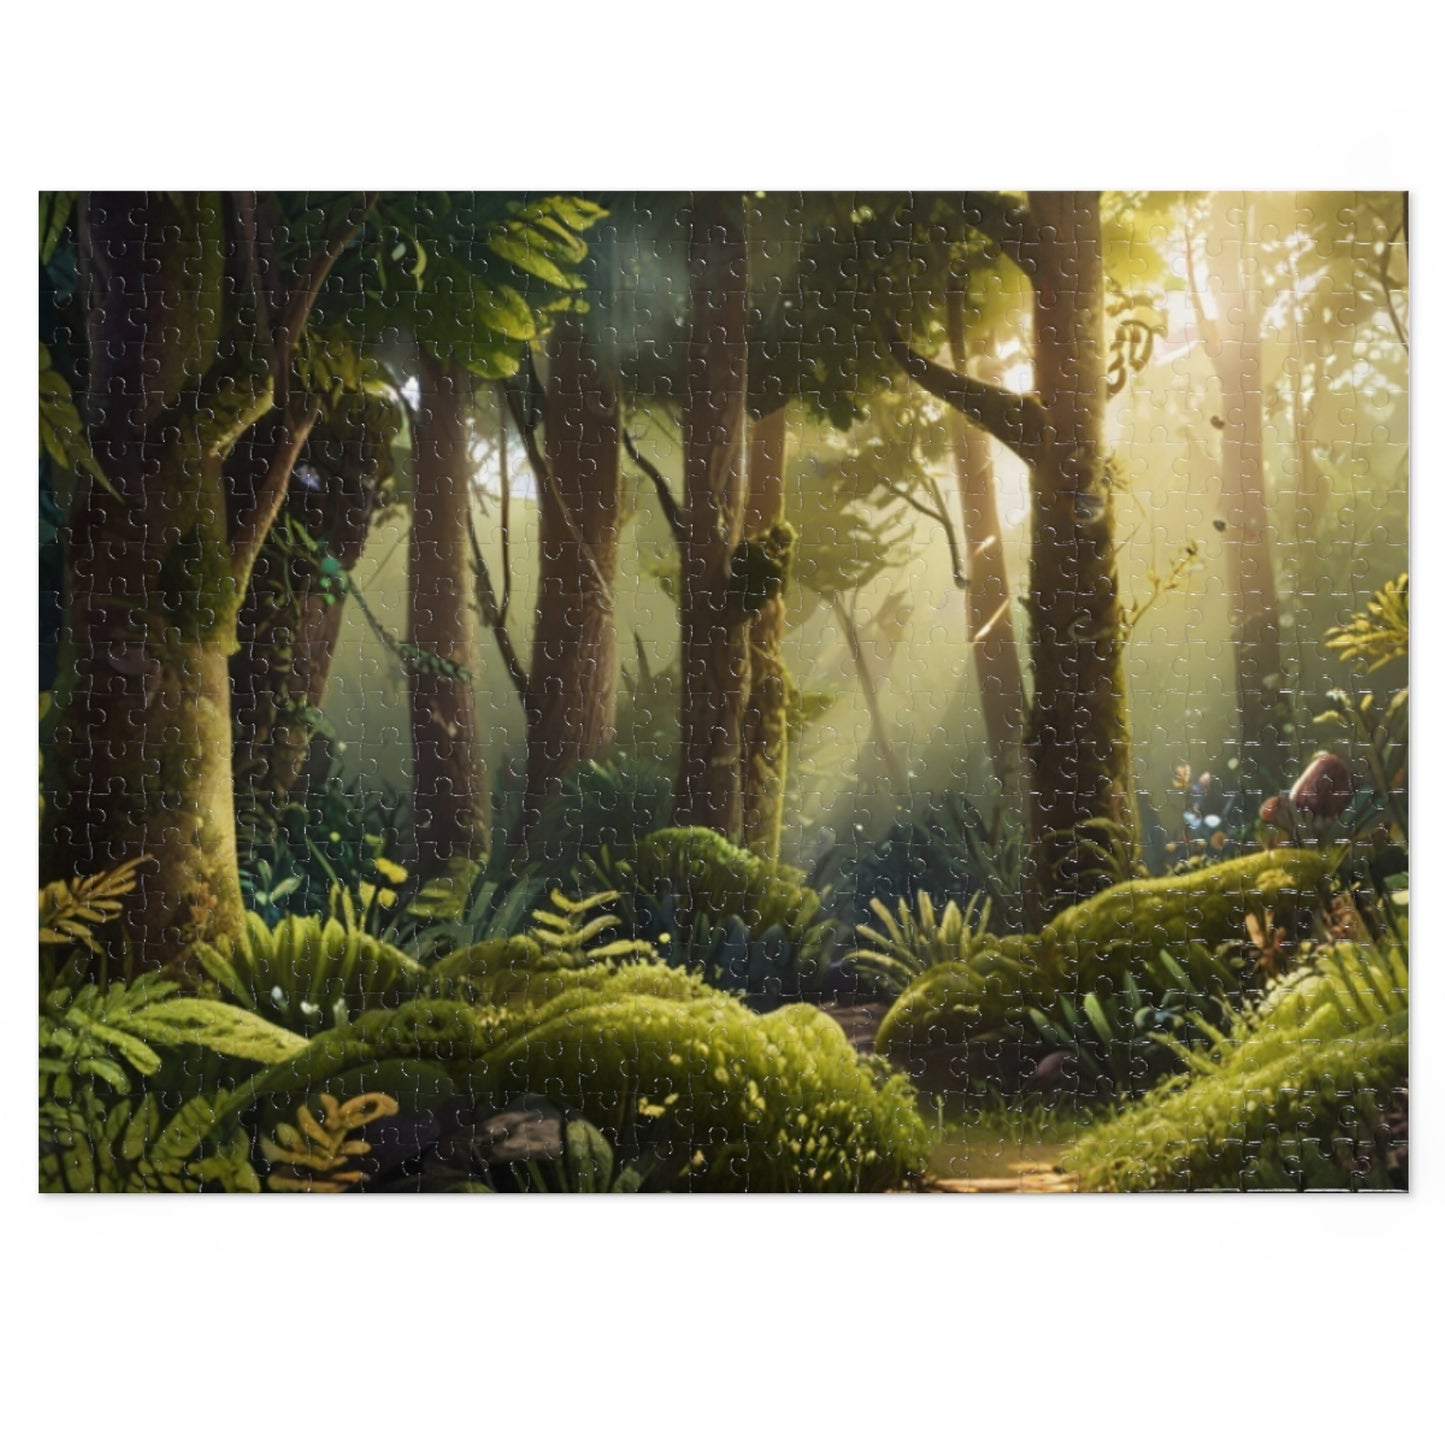 City Buzz and Nature Tranquility Jigsaw Puzzle (252, 500, 1000-Piece)